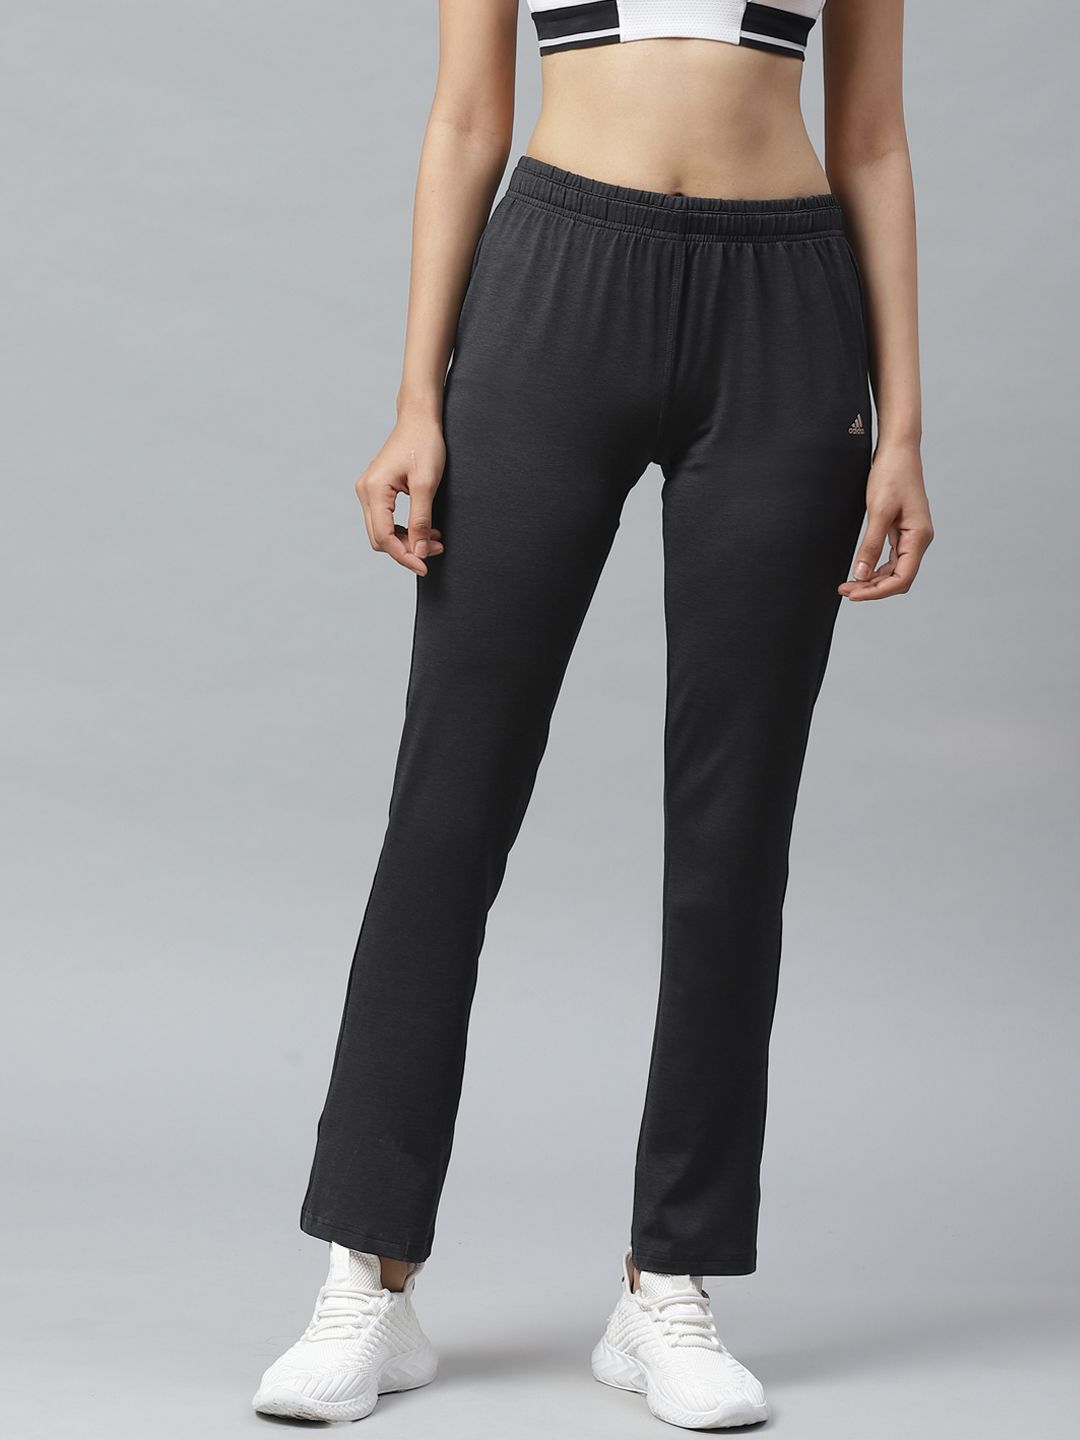 ADIDAS Women Charcoal Grey Solid Workout Pants Price in India